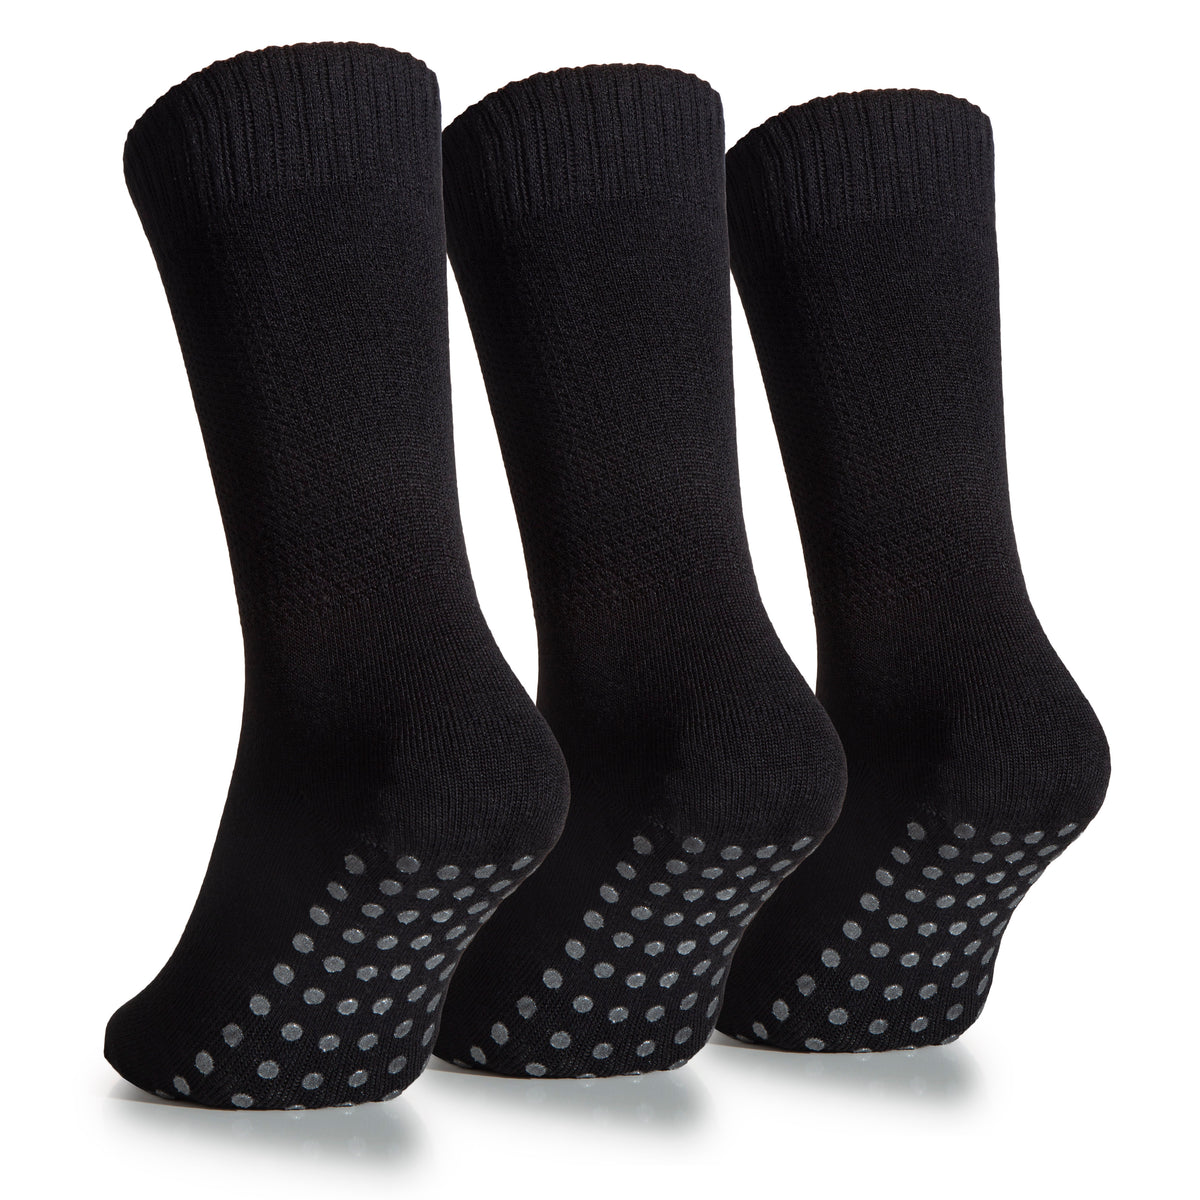 The picture shows three black socks with dots on them. These are Women's Bamboo Diabetic Ankle Non Slip Grip Socks.